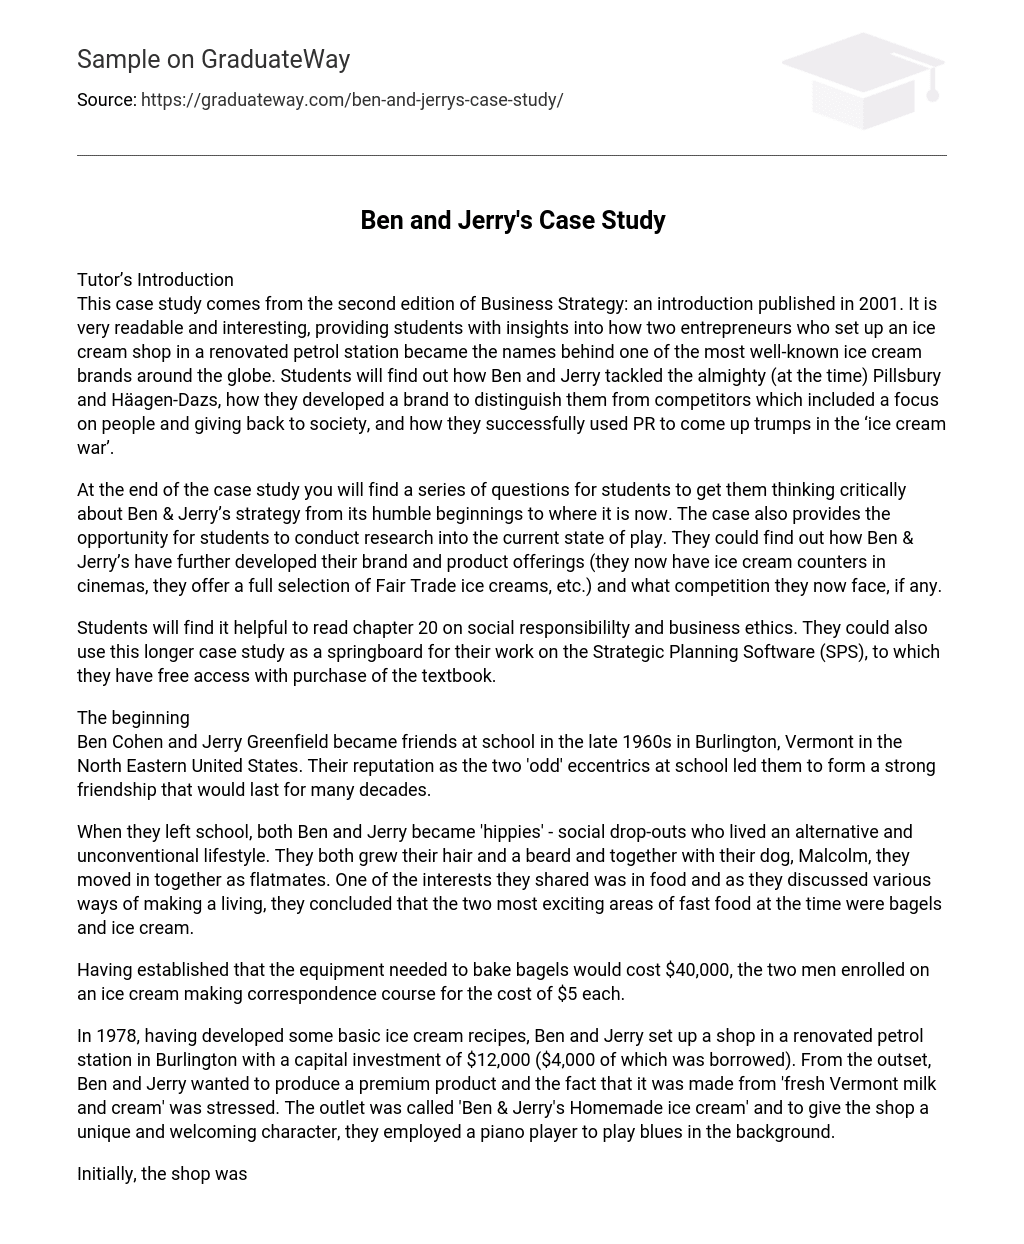 Ben and Jerry’s Case Study